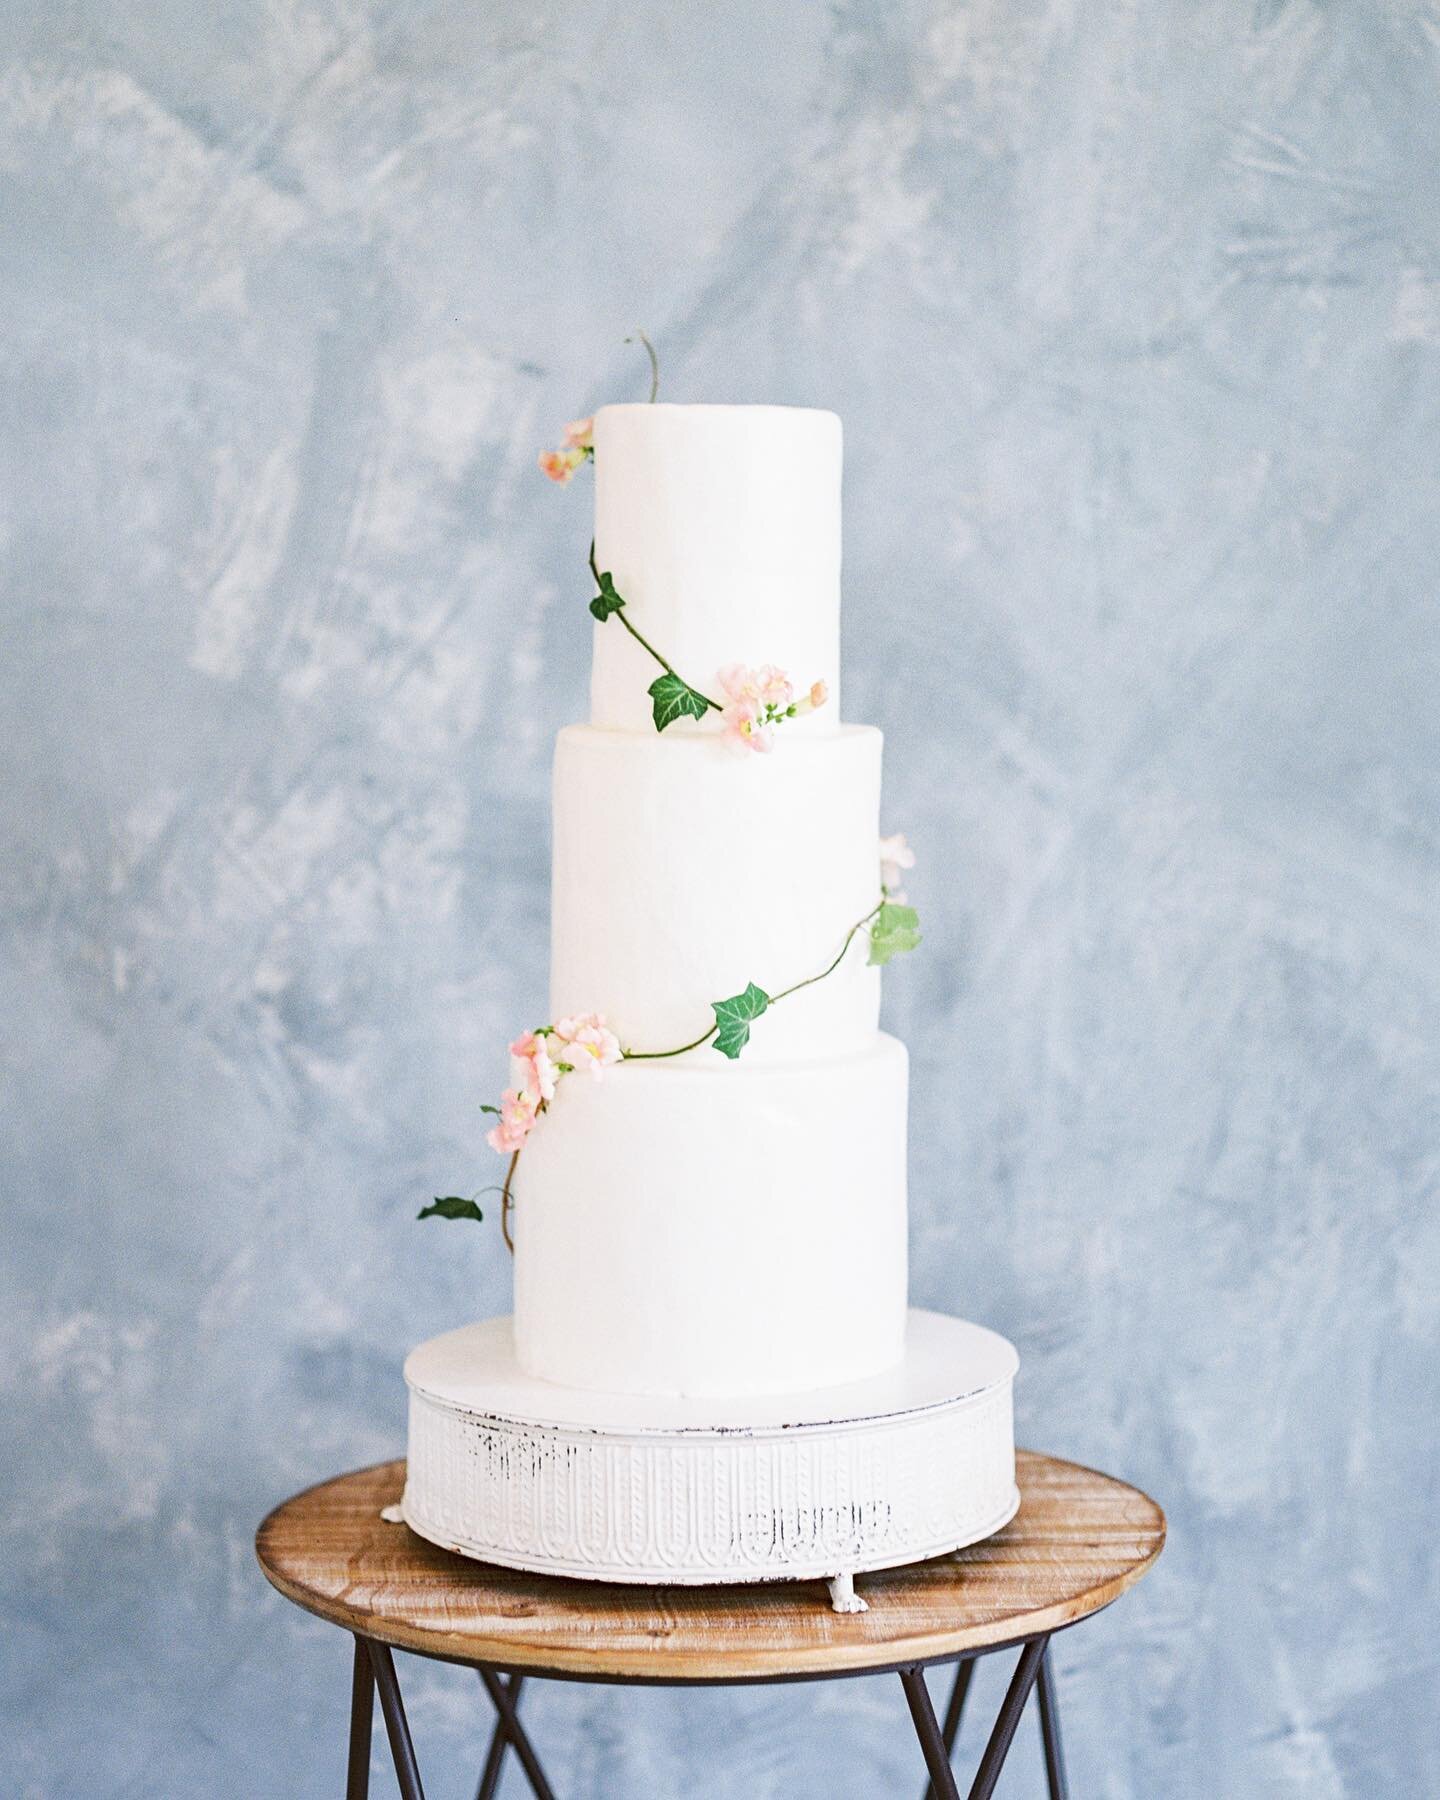 This cake. Crisp white with delicate blooms